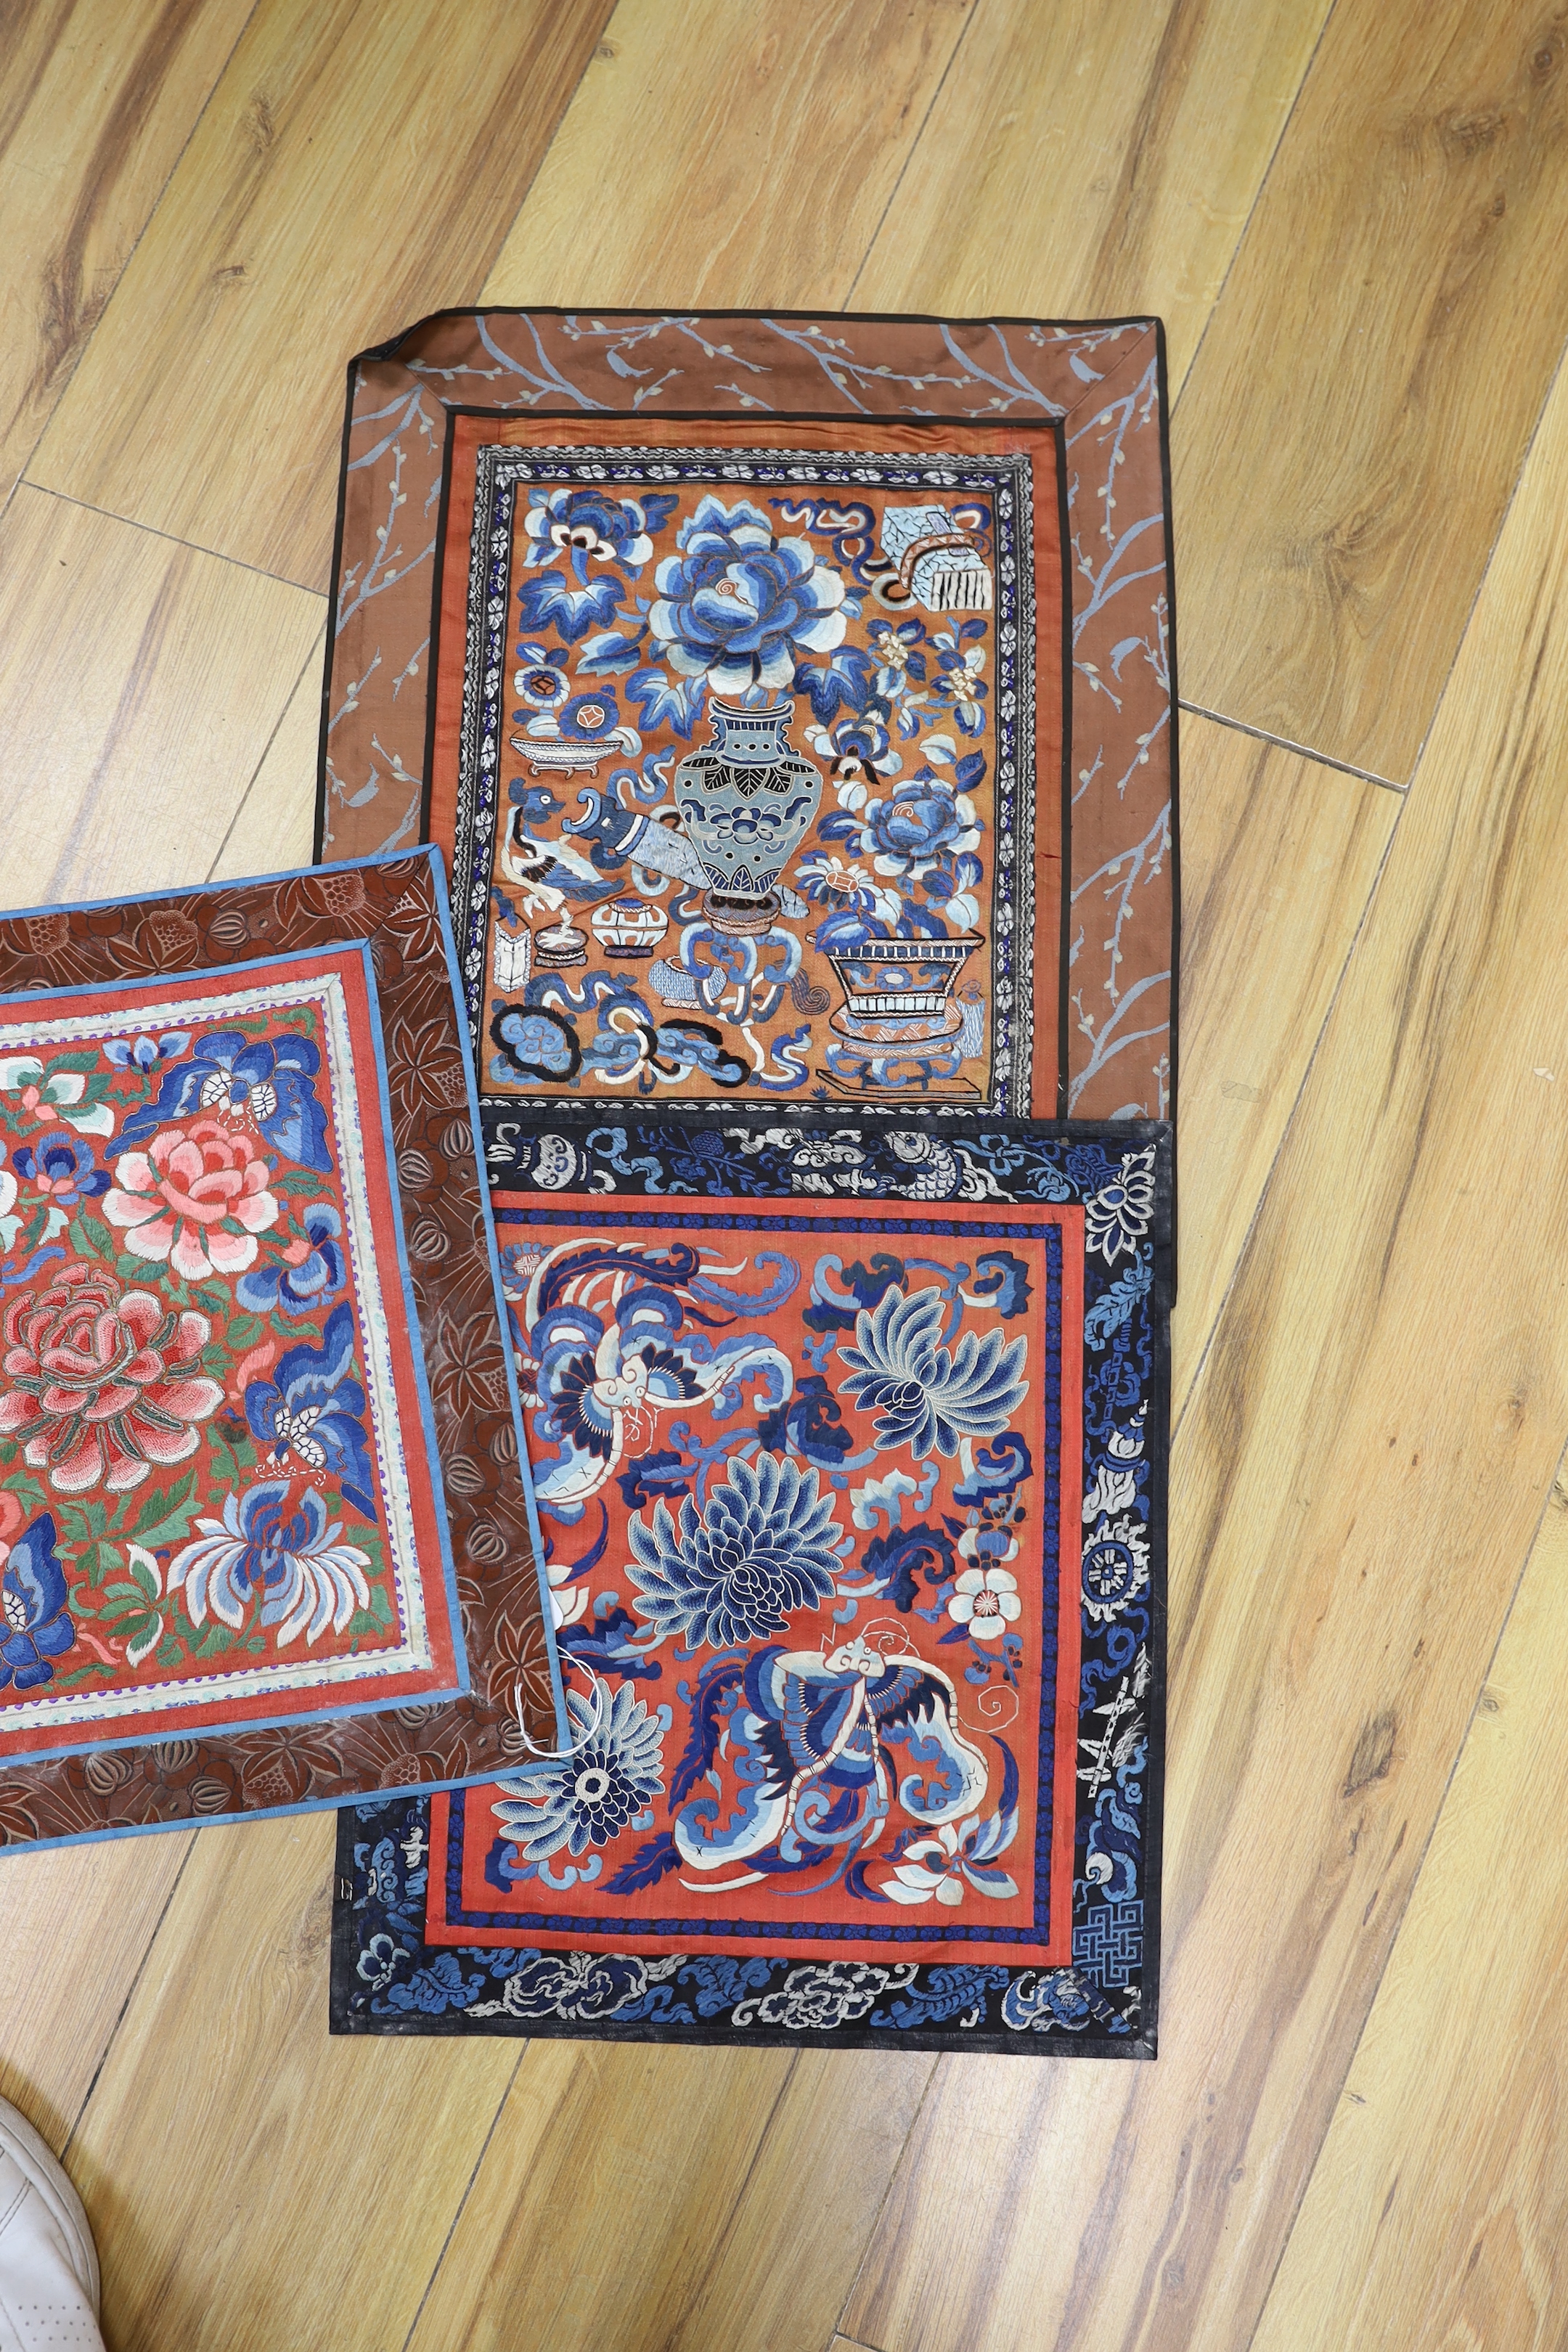 Six panels of Chinese silk embroidered mats, all using mixed stitches including Beijing knot, all bordered with silk brocade